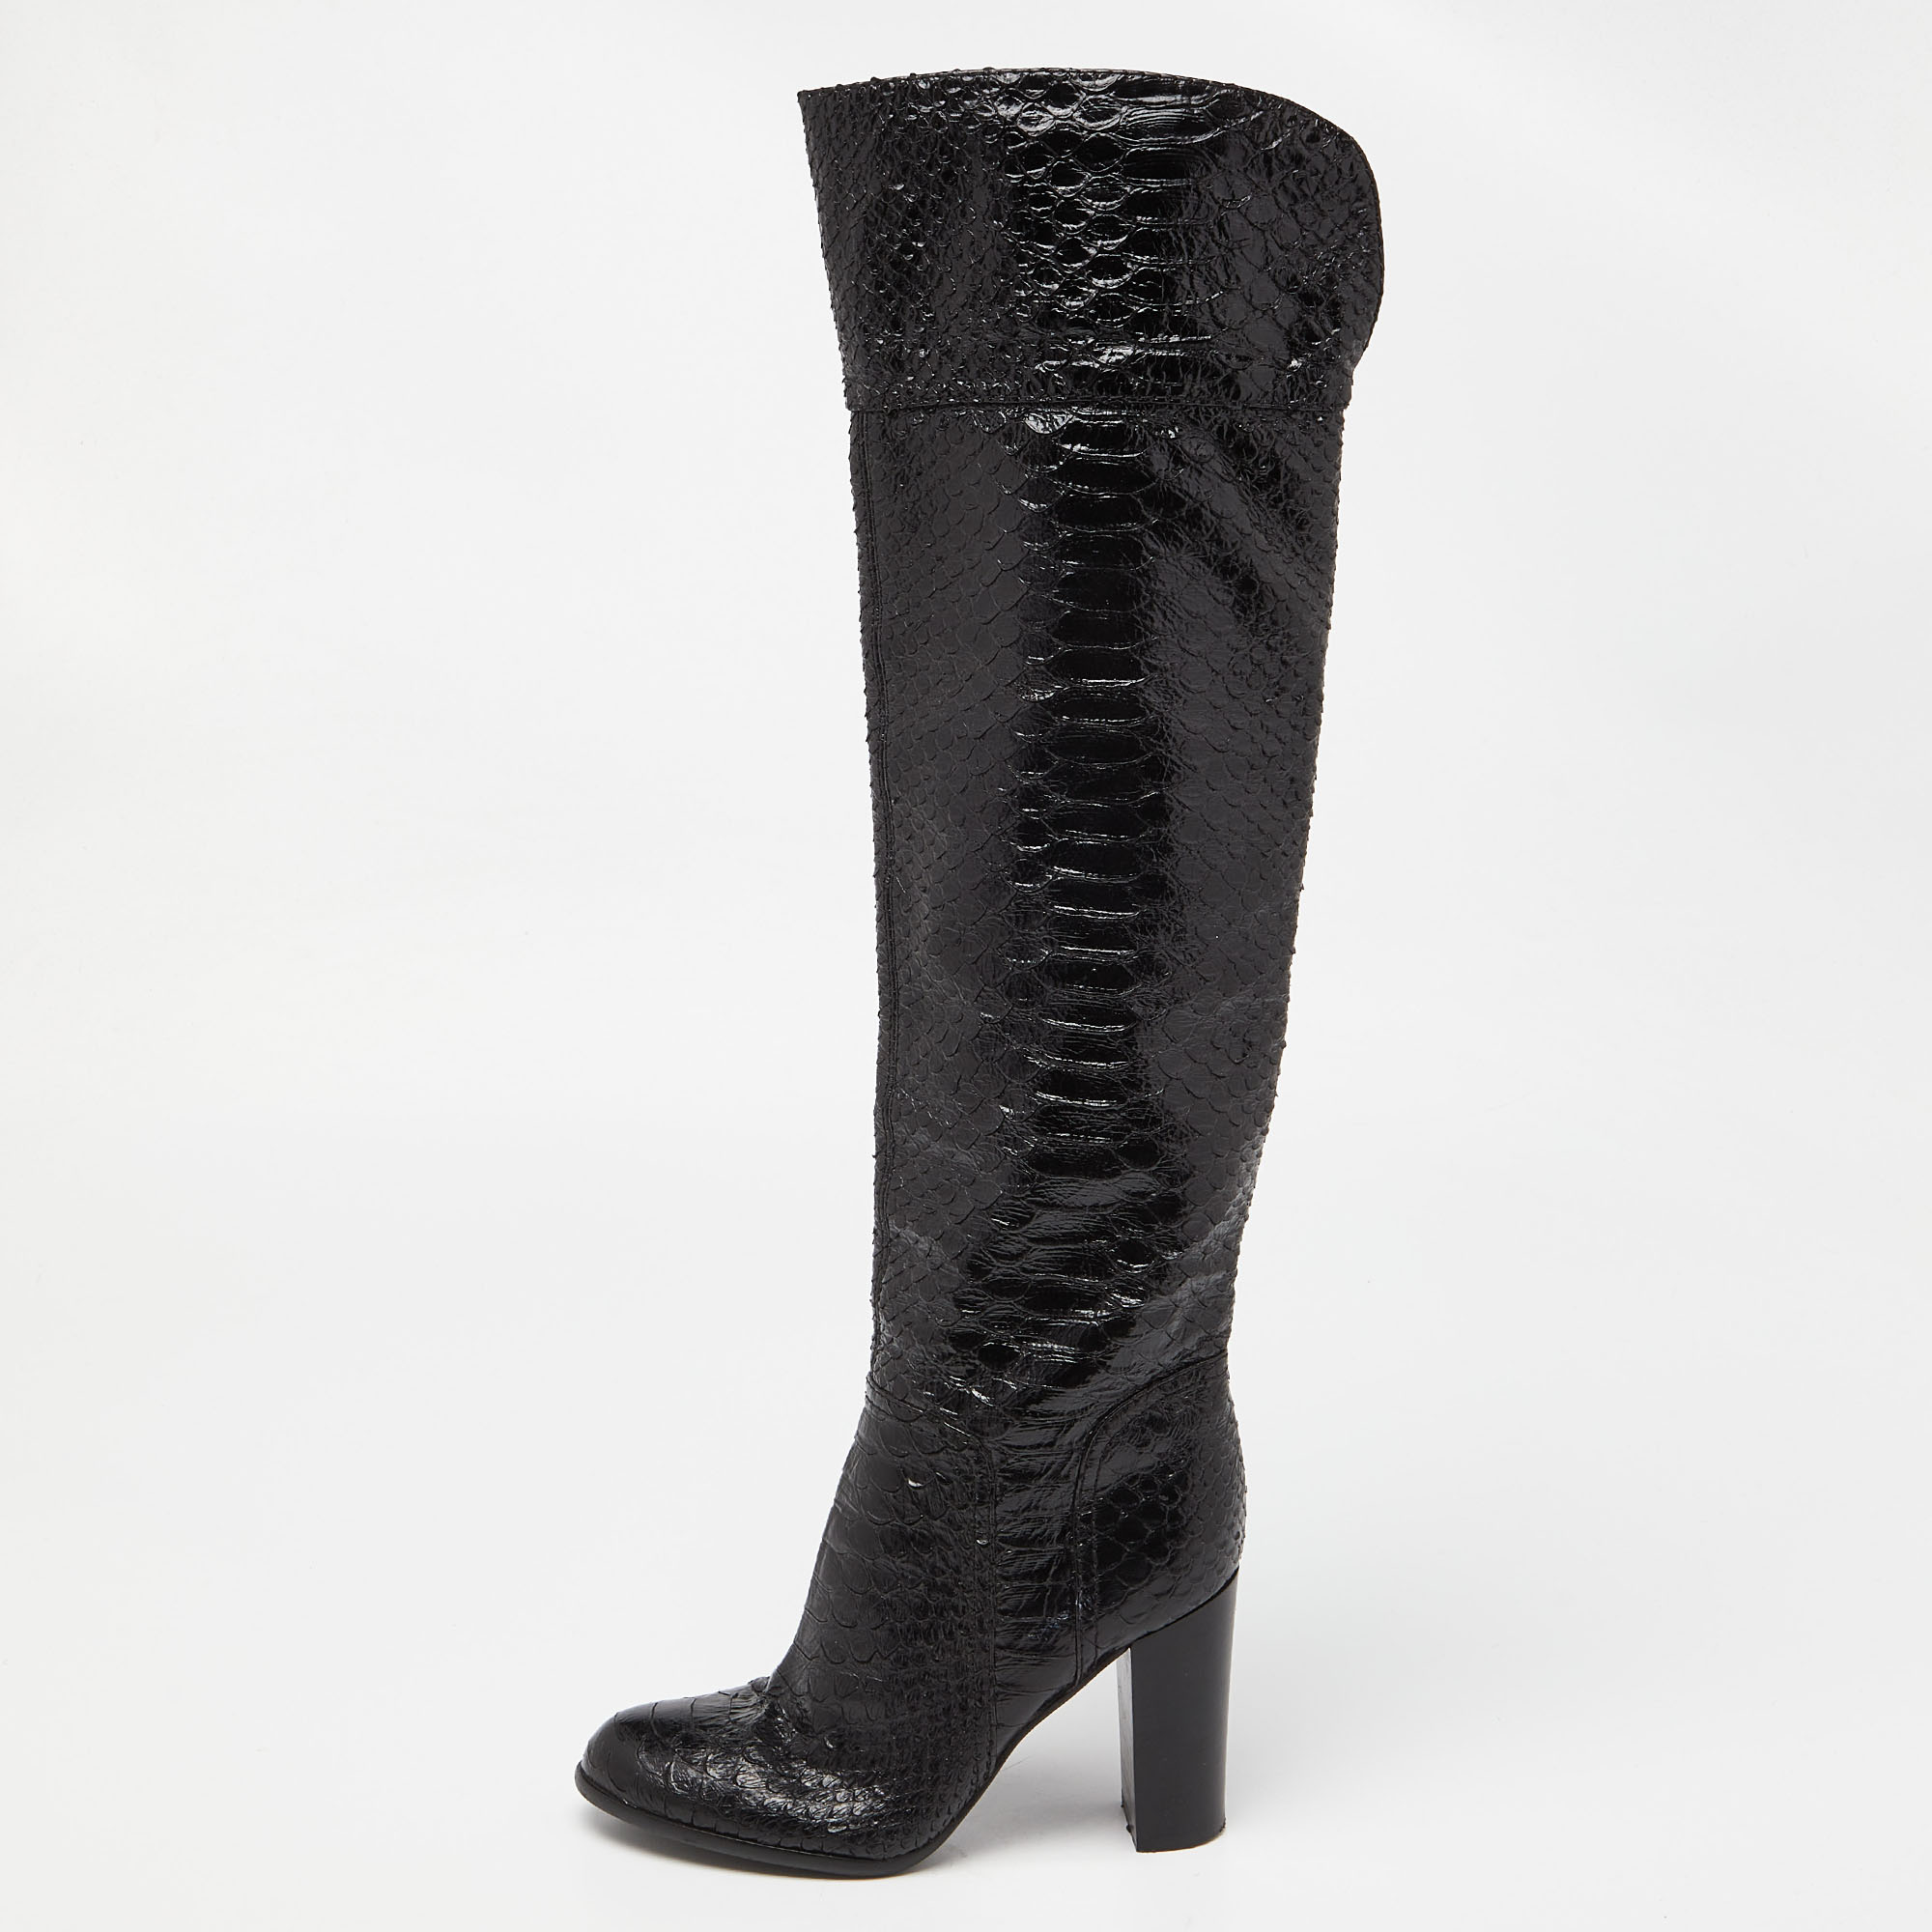 Pre-owned Sergio Rossi Black Snakeskin Embossed Leather Over The Knee Length Boots Size 37